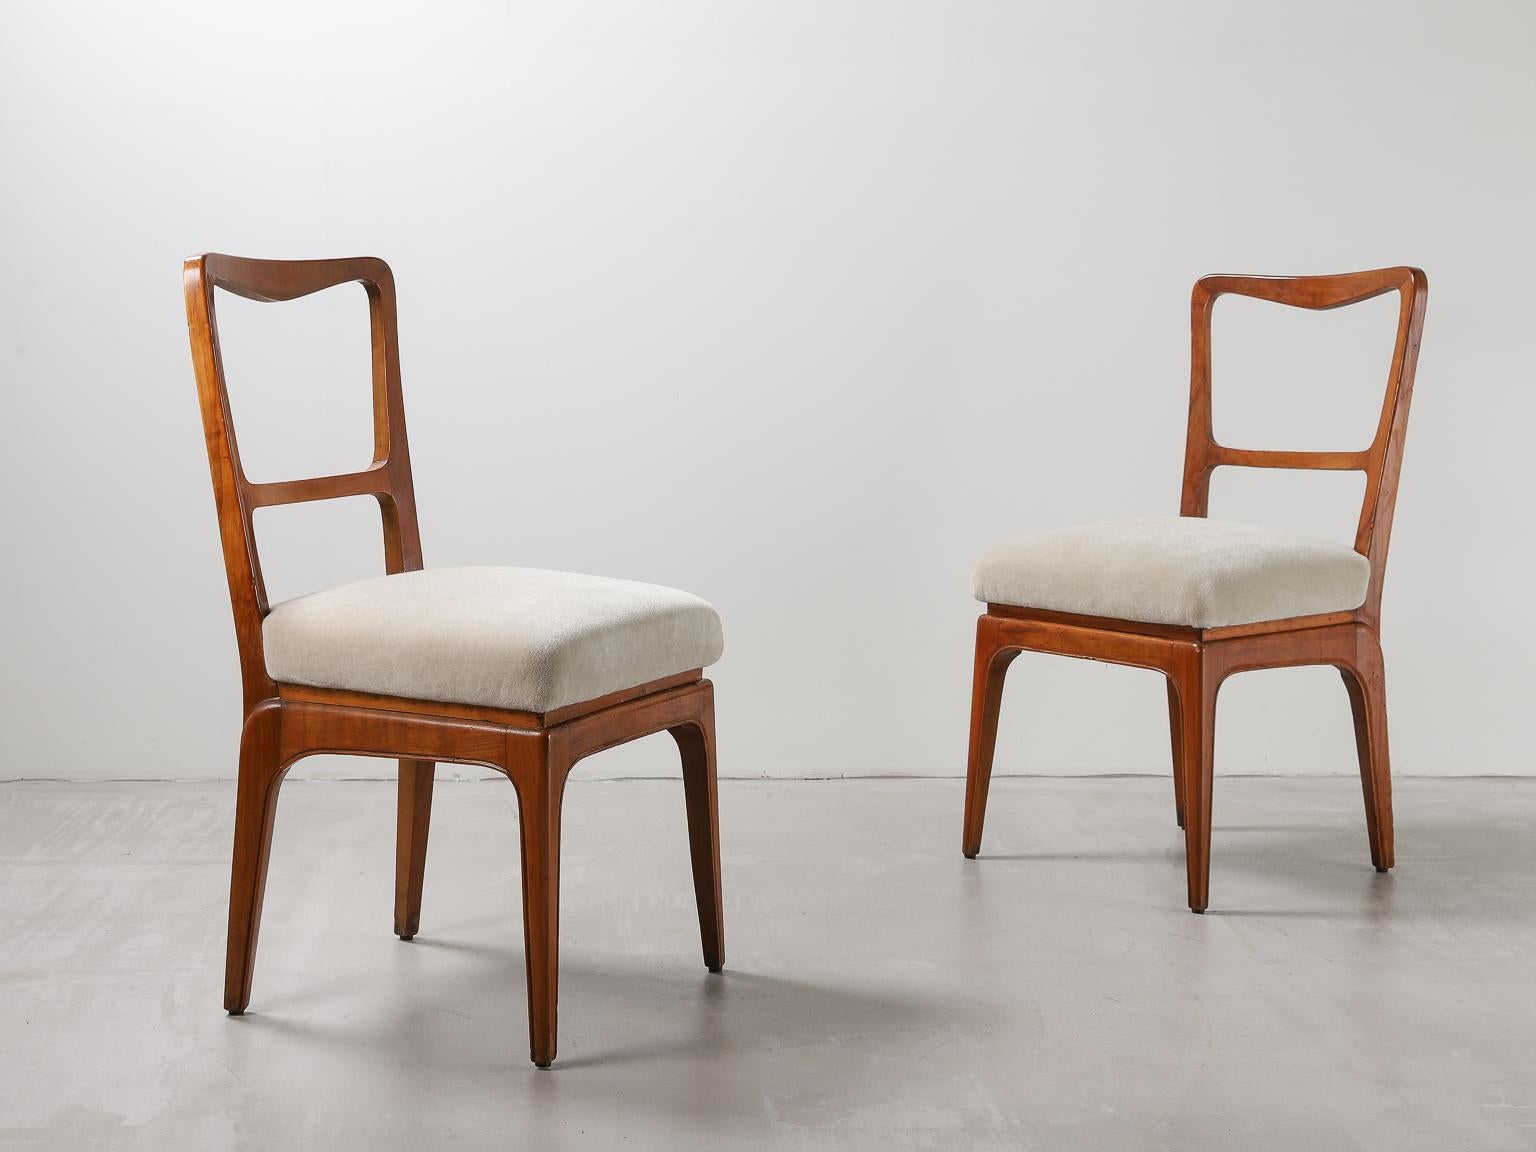 Pair of chairs designed by Paolo Buffa in a warm cherrywood, re-upholstered in bespoke mohair fabric by Thurstan.

Paolo Buffa (1903-1970) was born in Milan before going to study architecture at Politecnico, graduating in 1927. In addition to